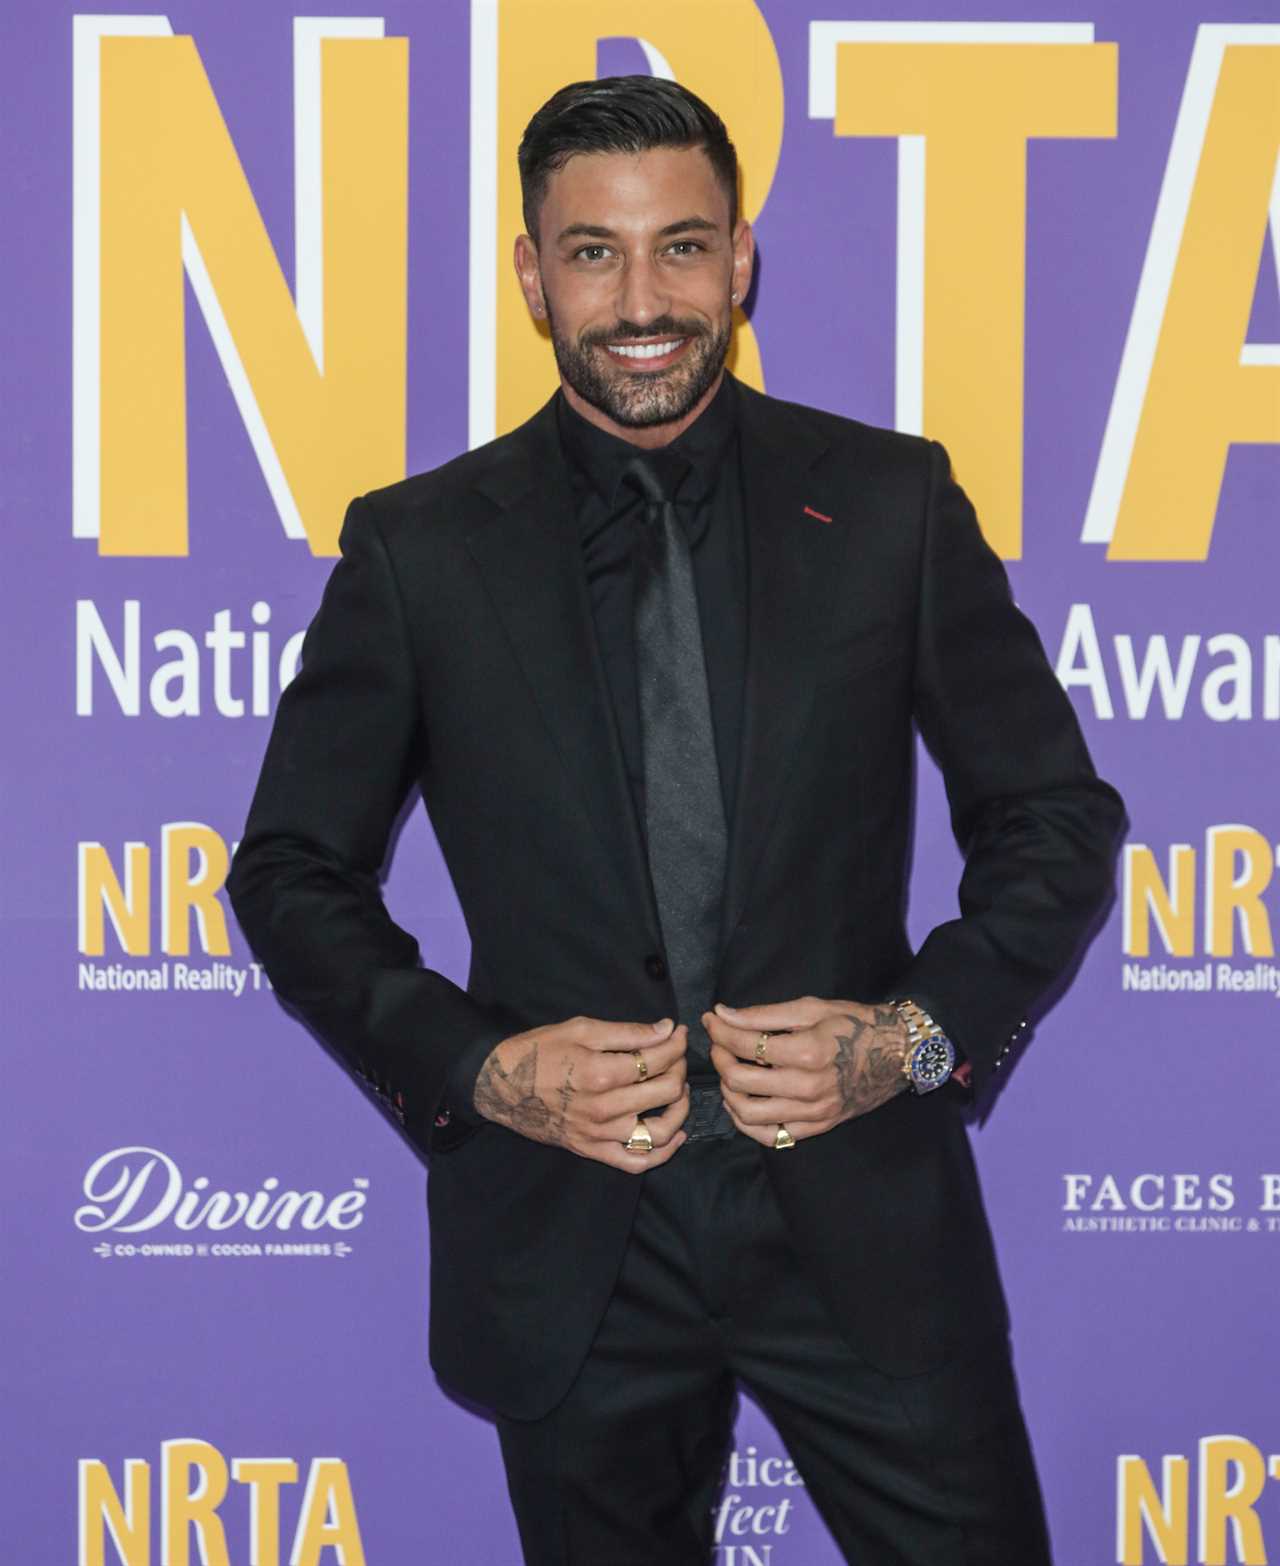 Giovanni Pernice is favourite to be paired with a male celeb on this year’s Strictly